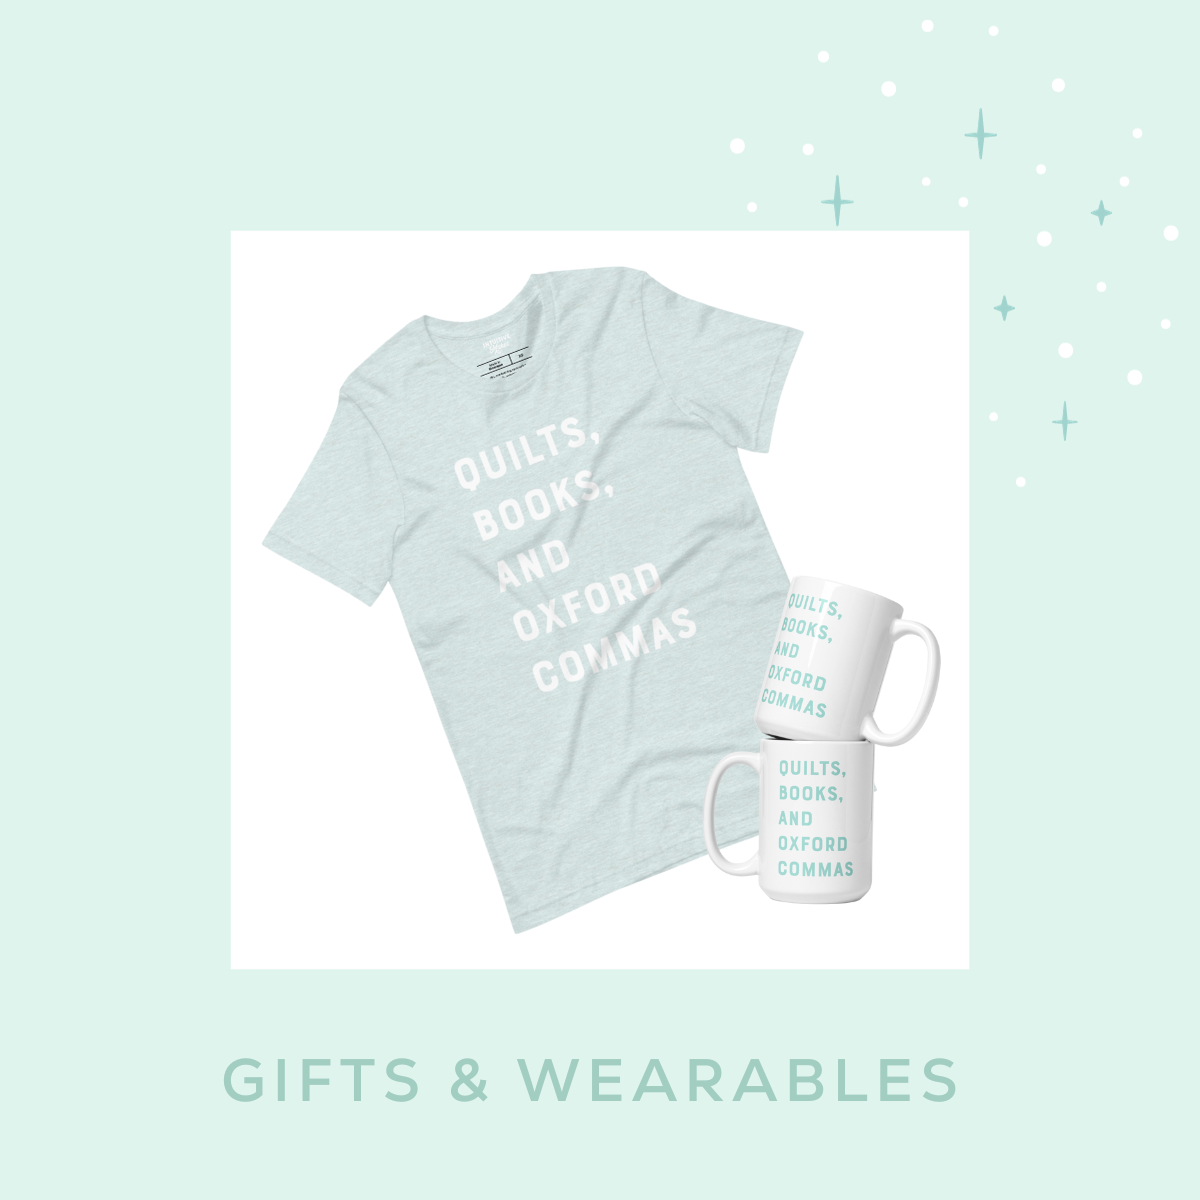 Gifts & Wearables